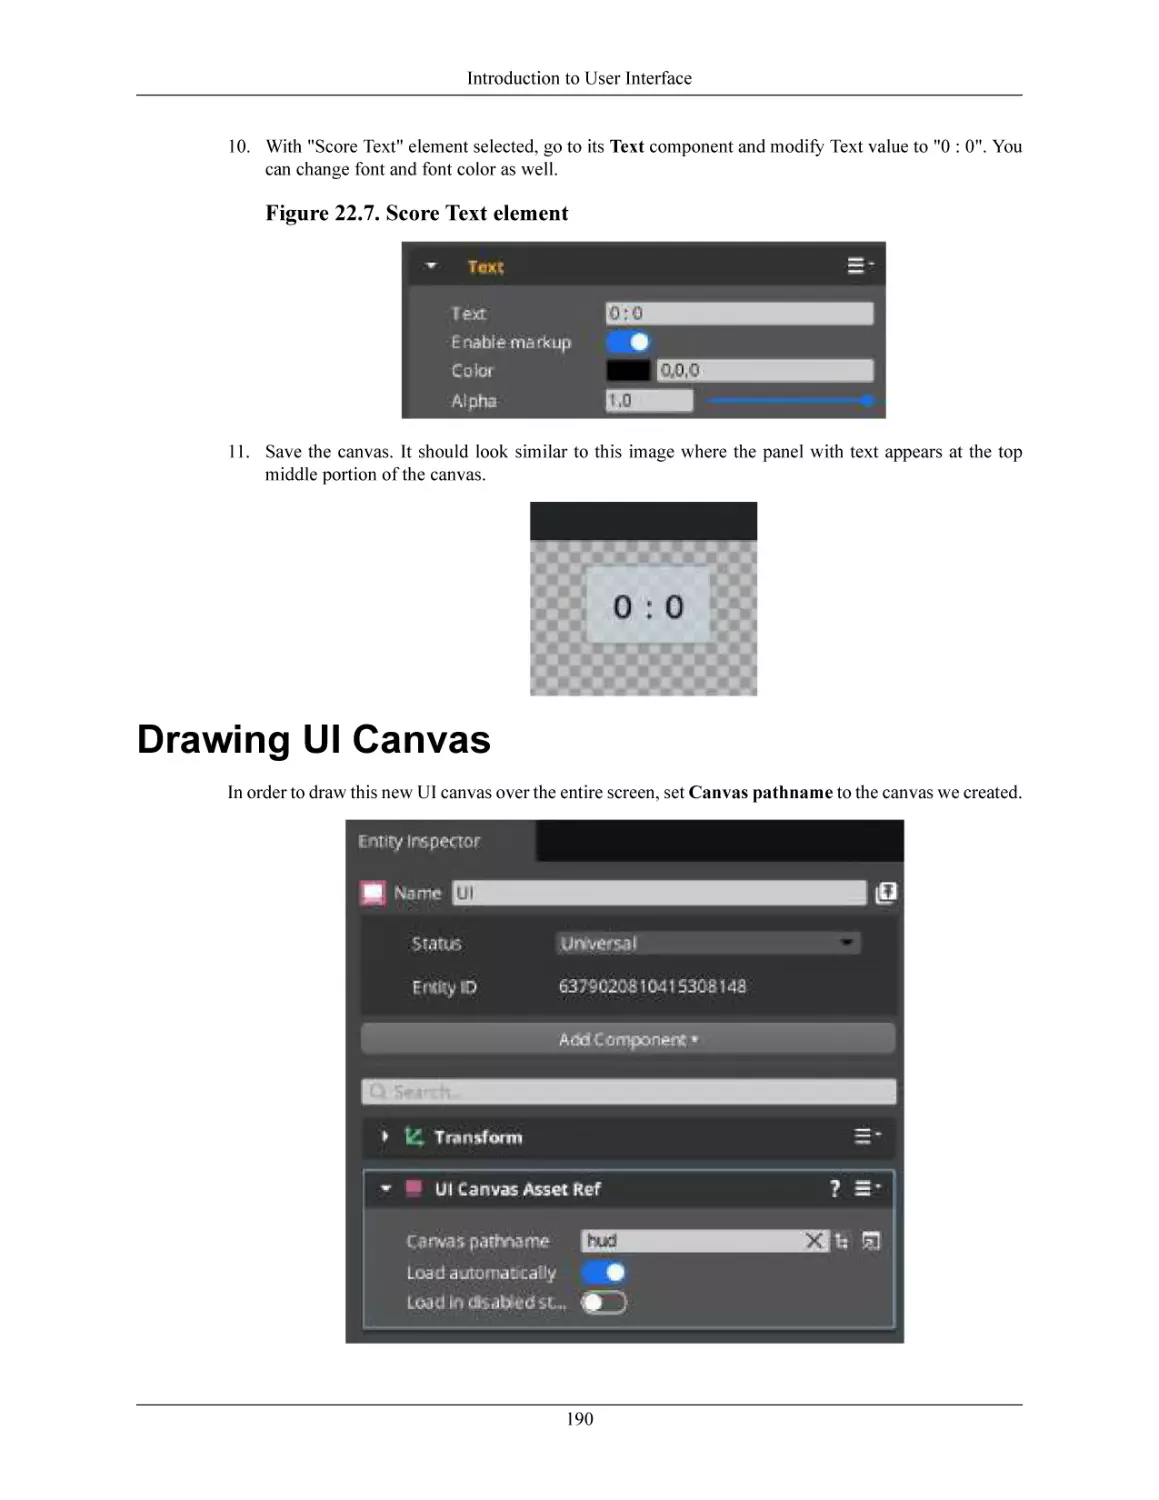 Drawing UI Canvas